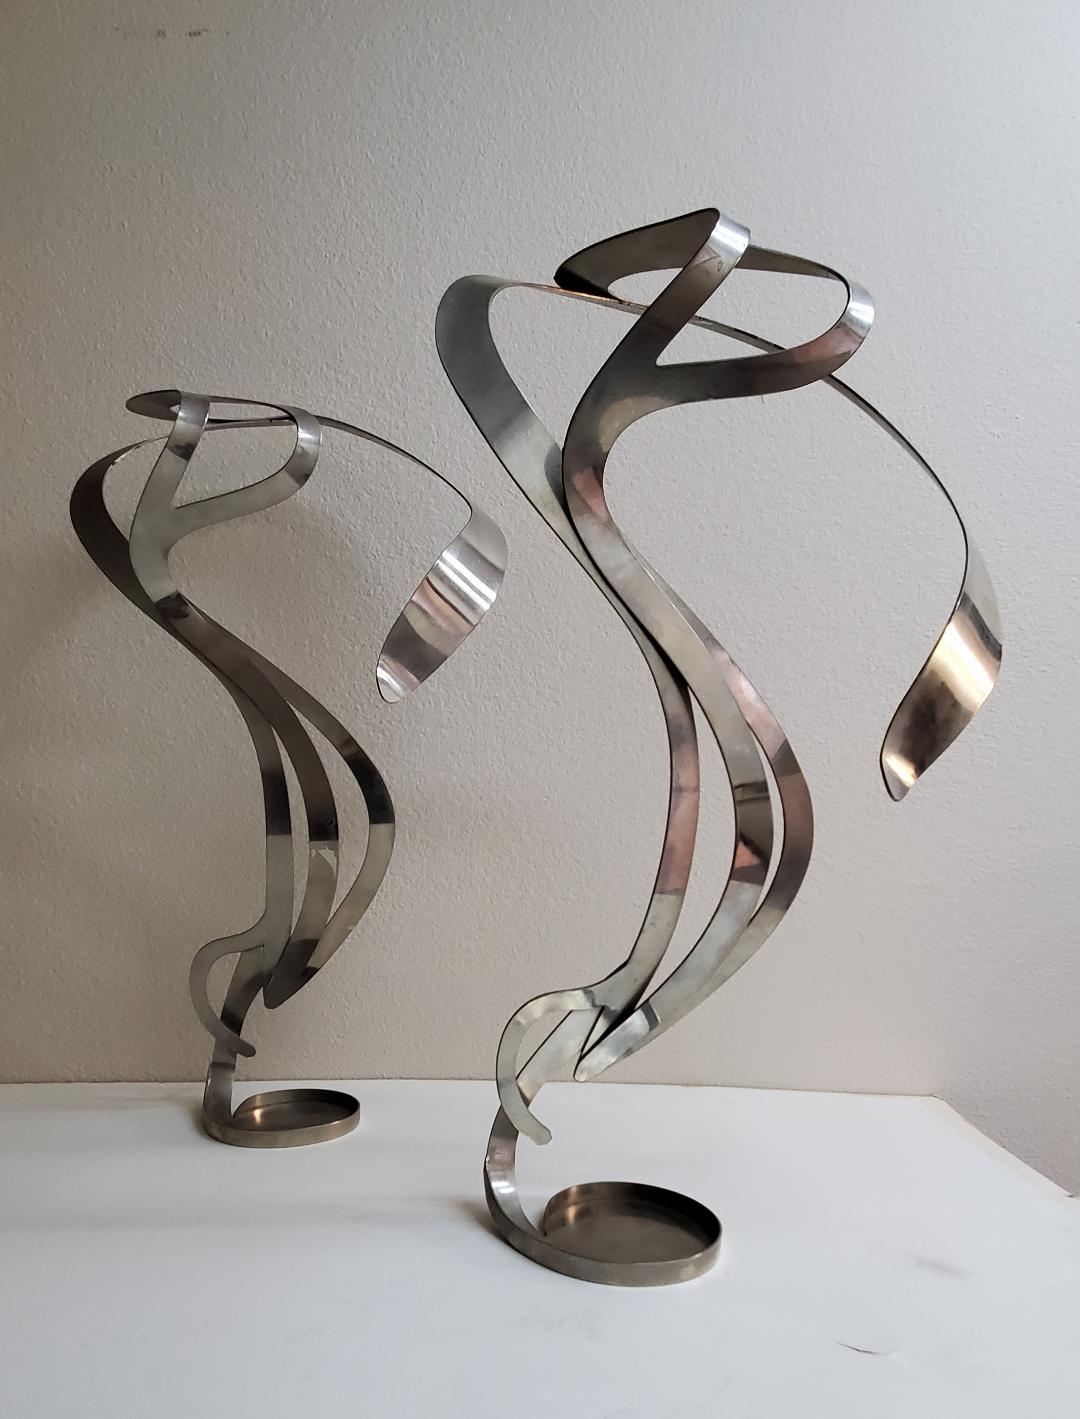 2 Art Nouveau Styled Candle Holders Crafted Into Swirling Twirling Metal Smoke  For Sale 6